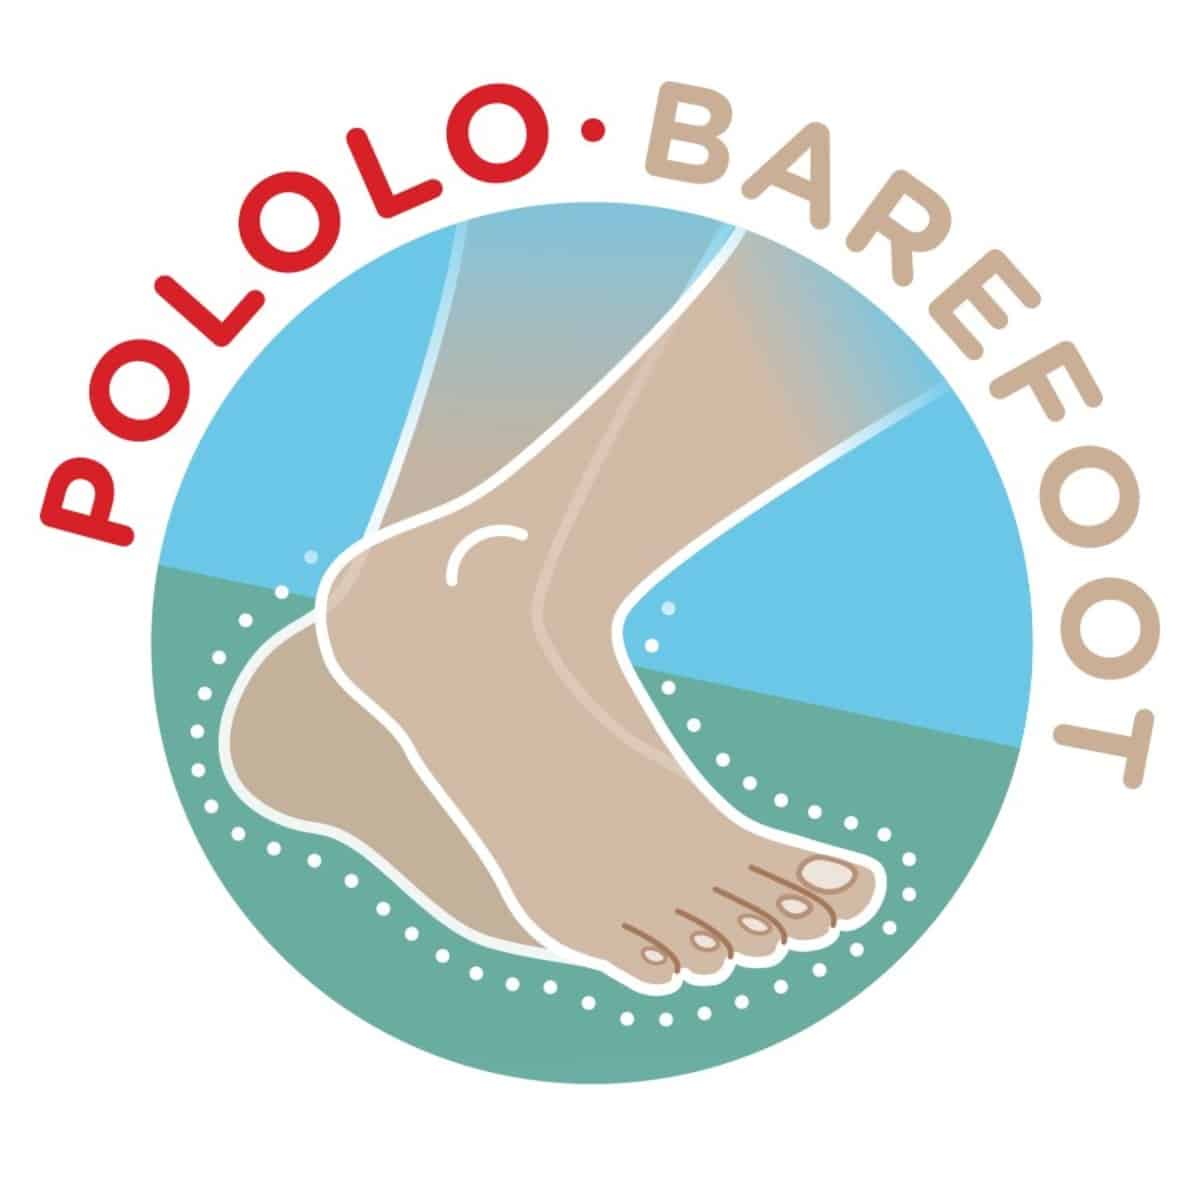 pololo-barefoot-label